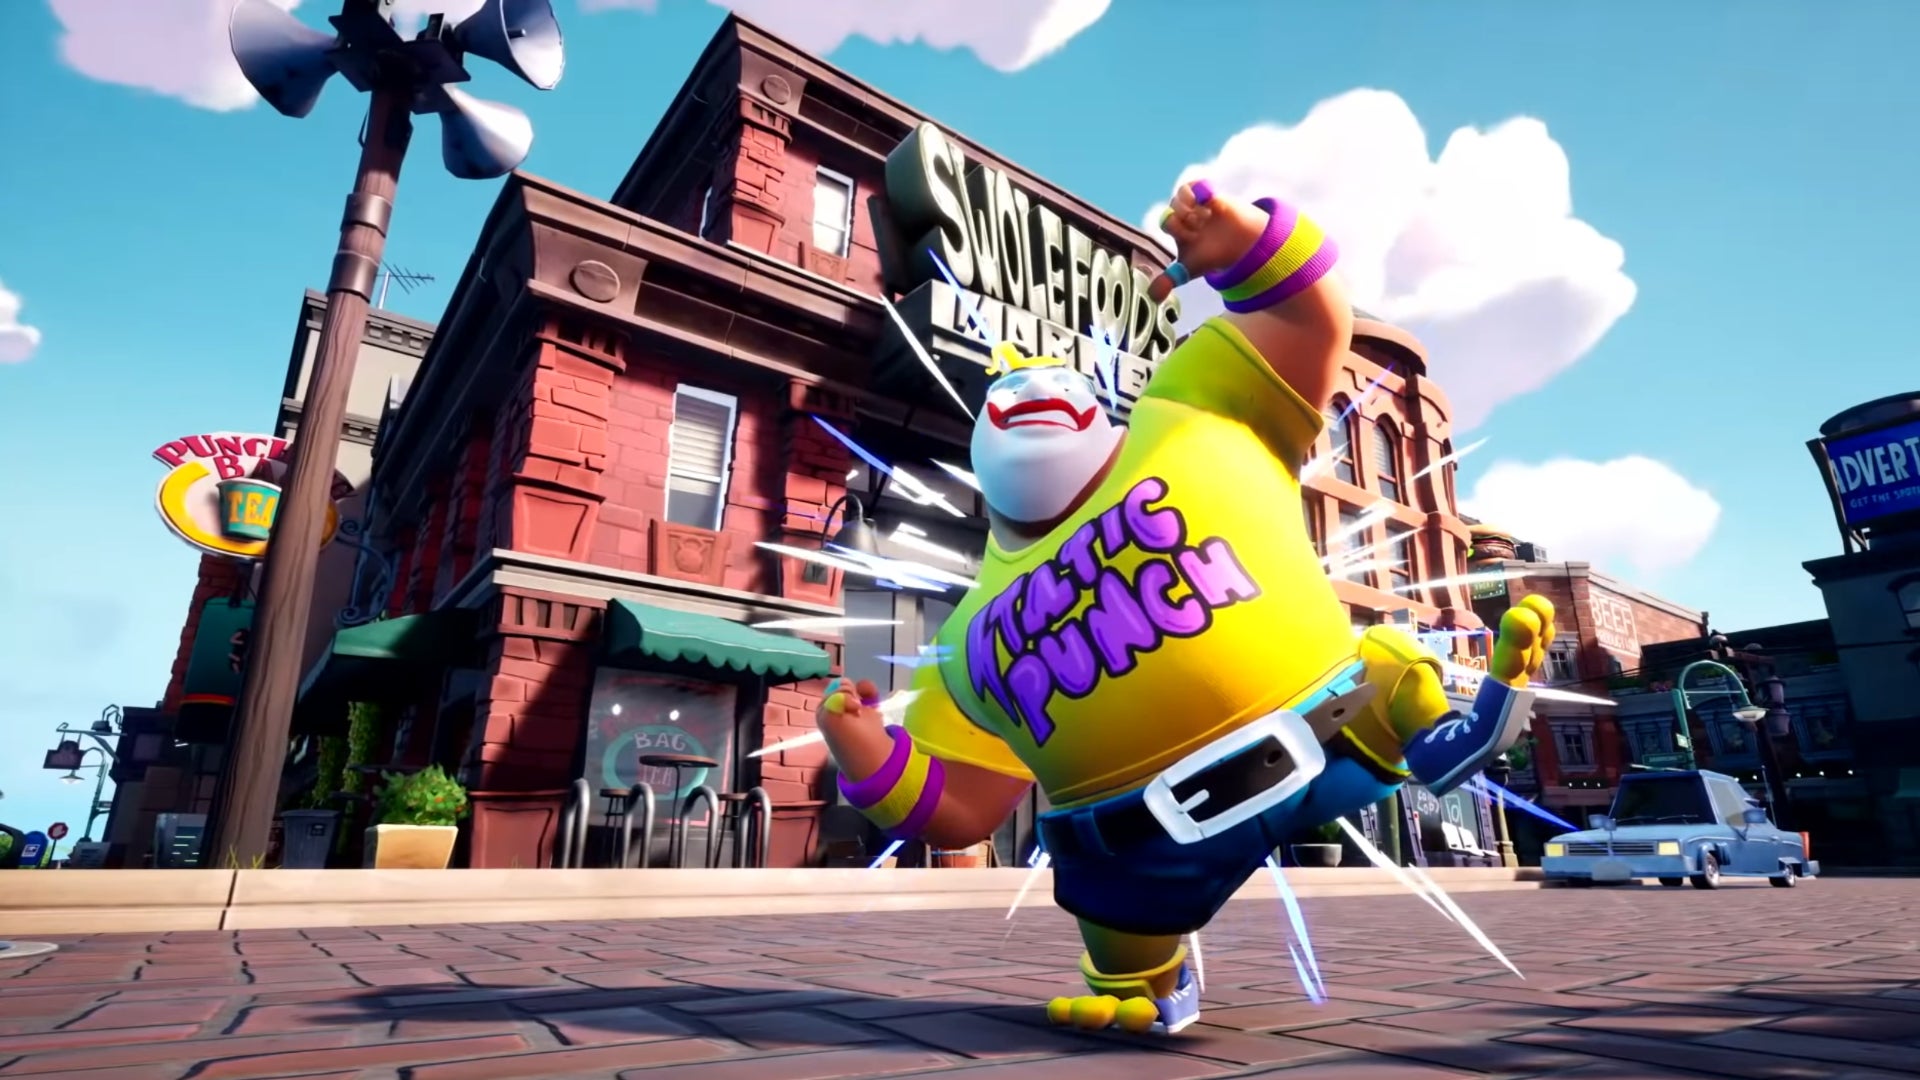 A Rumbleverse player poses in front of a SwoleFoods Market building.